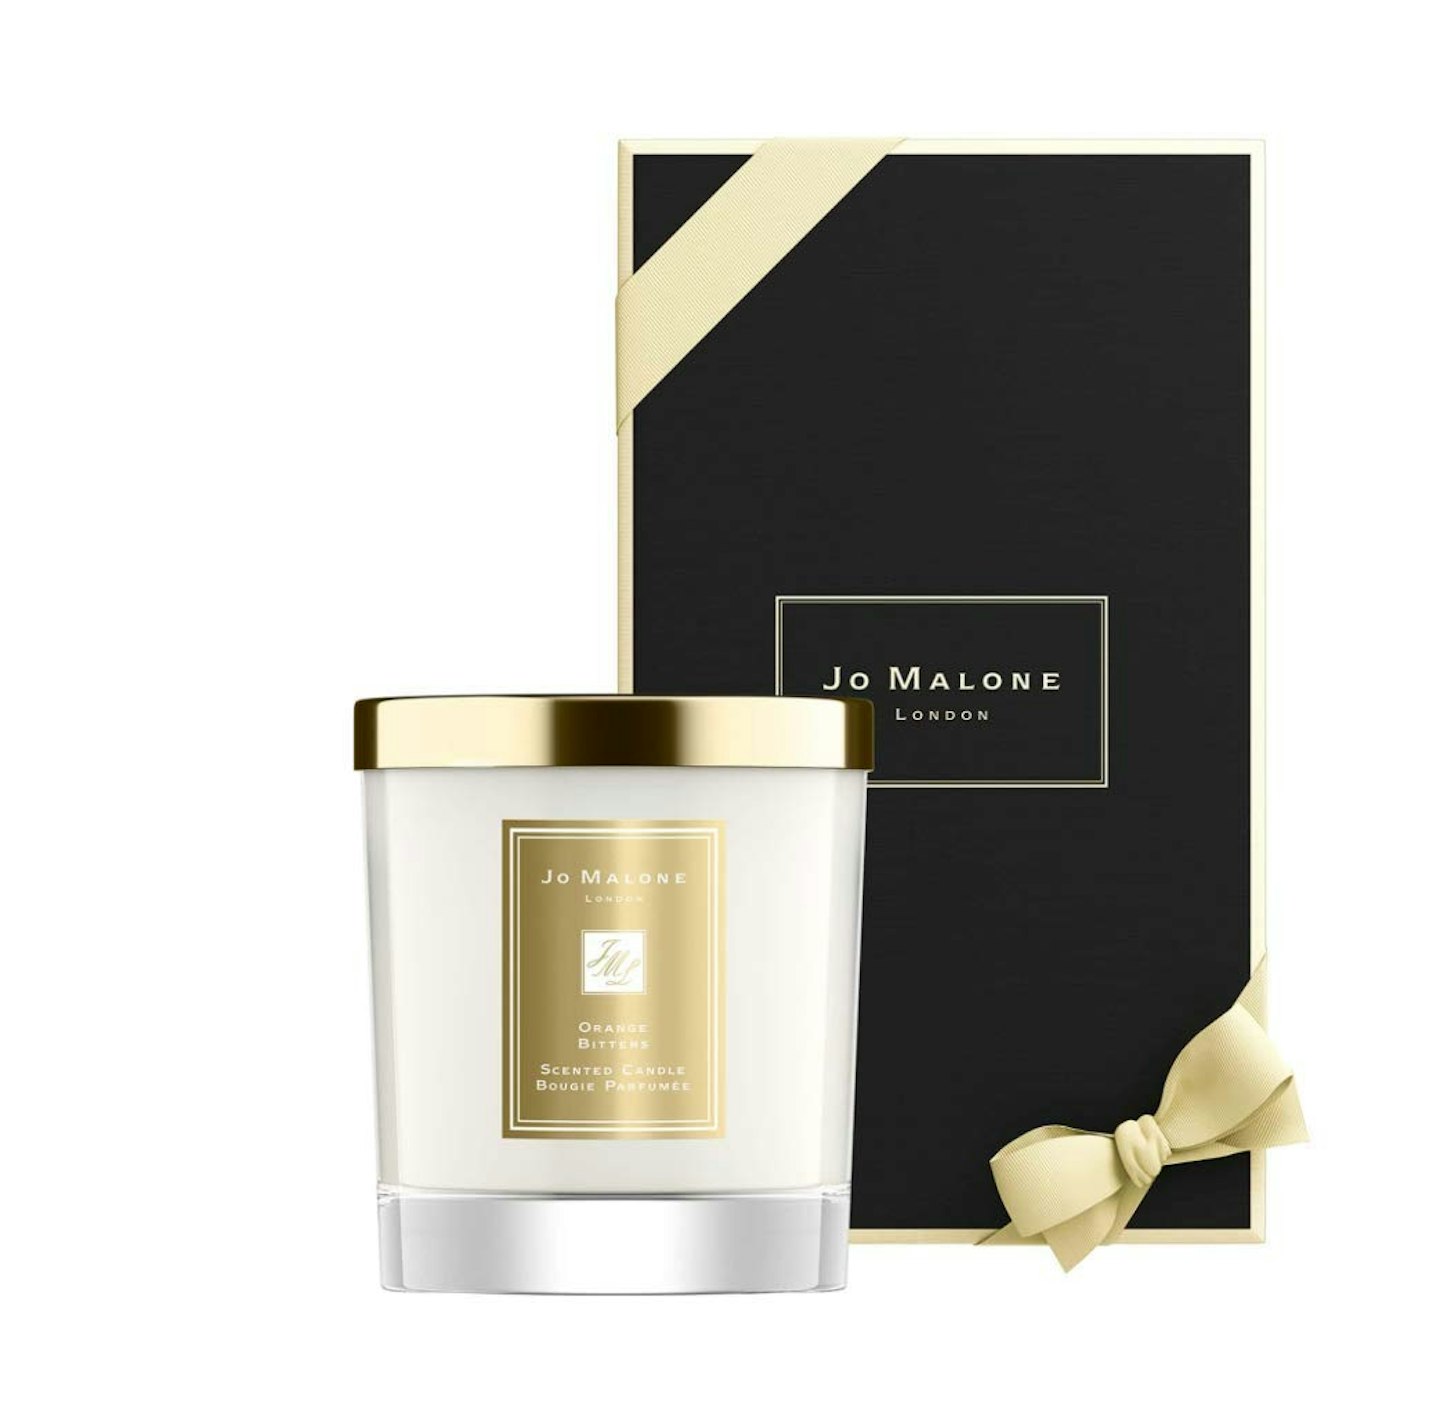 Jo Malone Orange Bitters Home Candle, £48 for 200g